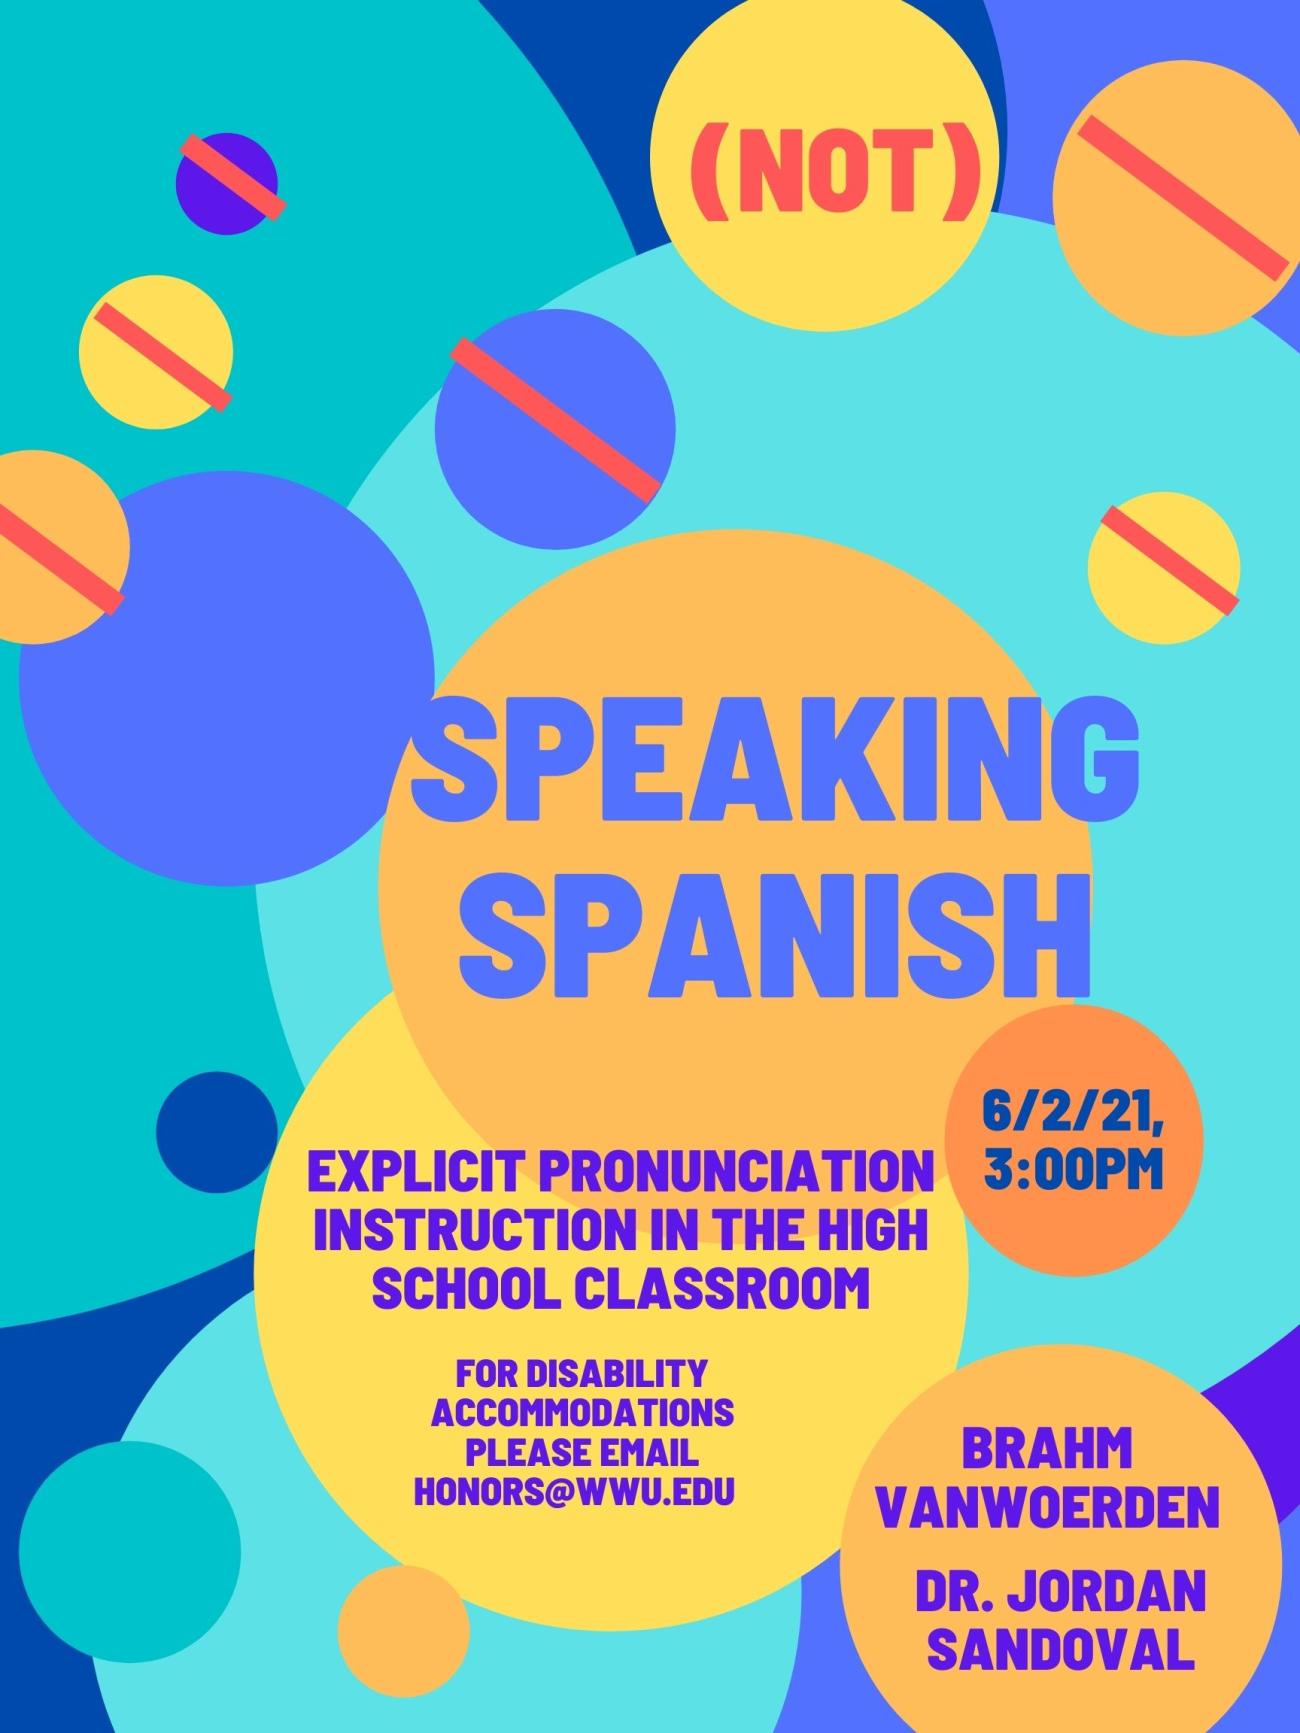 A background of yellow, orange, and blue circles. Text reads: “(Not) Speaking Spanish: Explicit Pronunciation Instruction in the High School Classroom. 6/2/2021, 3:00 pm, Brahm vanWoerden and Dr. Jordan Sandoval. For disability accommodations please email honors@wwu.edu” 